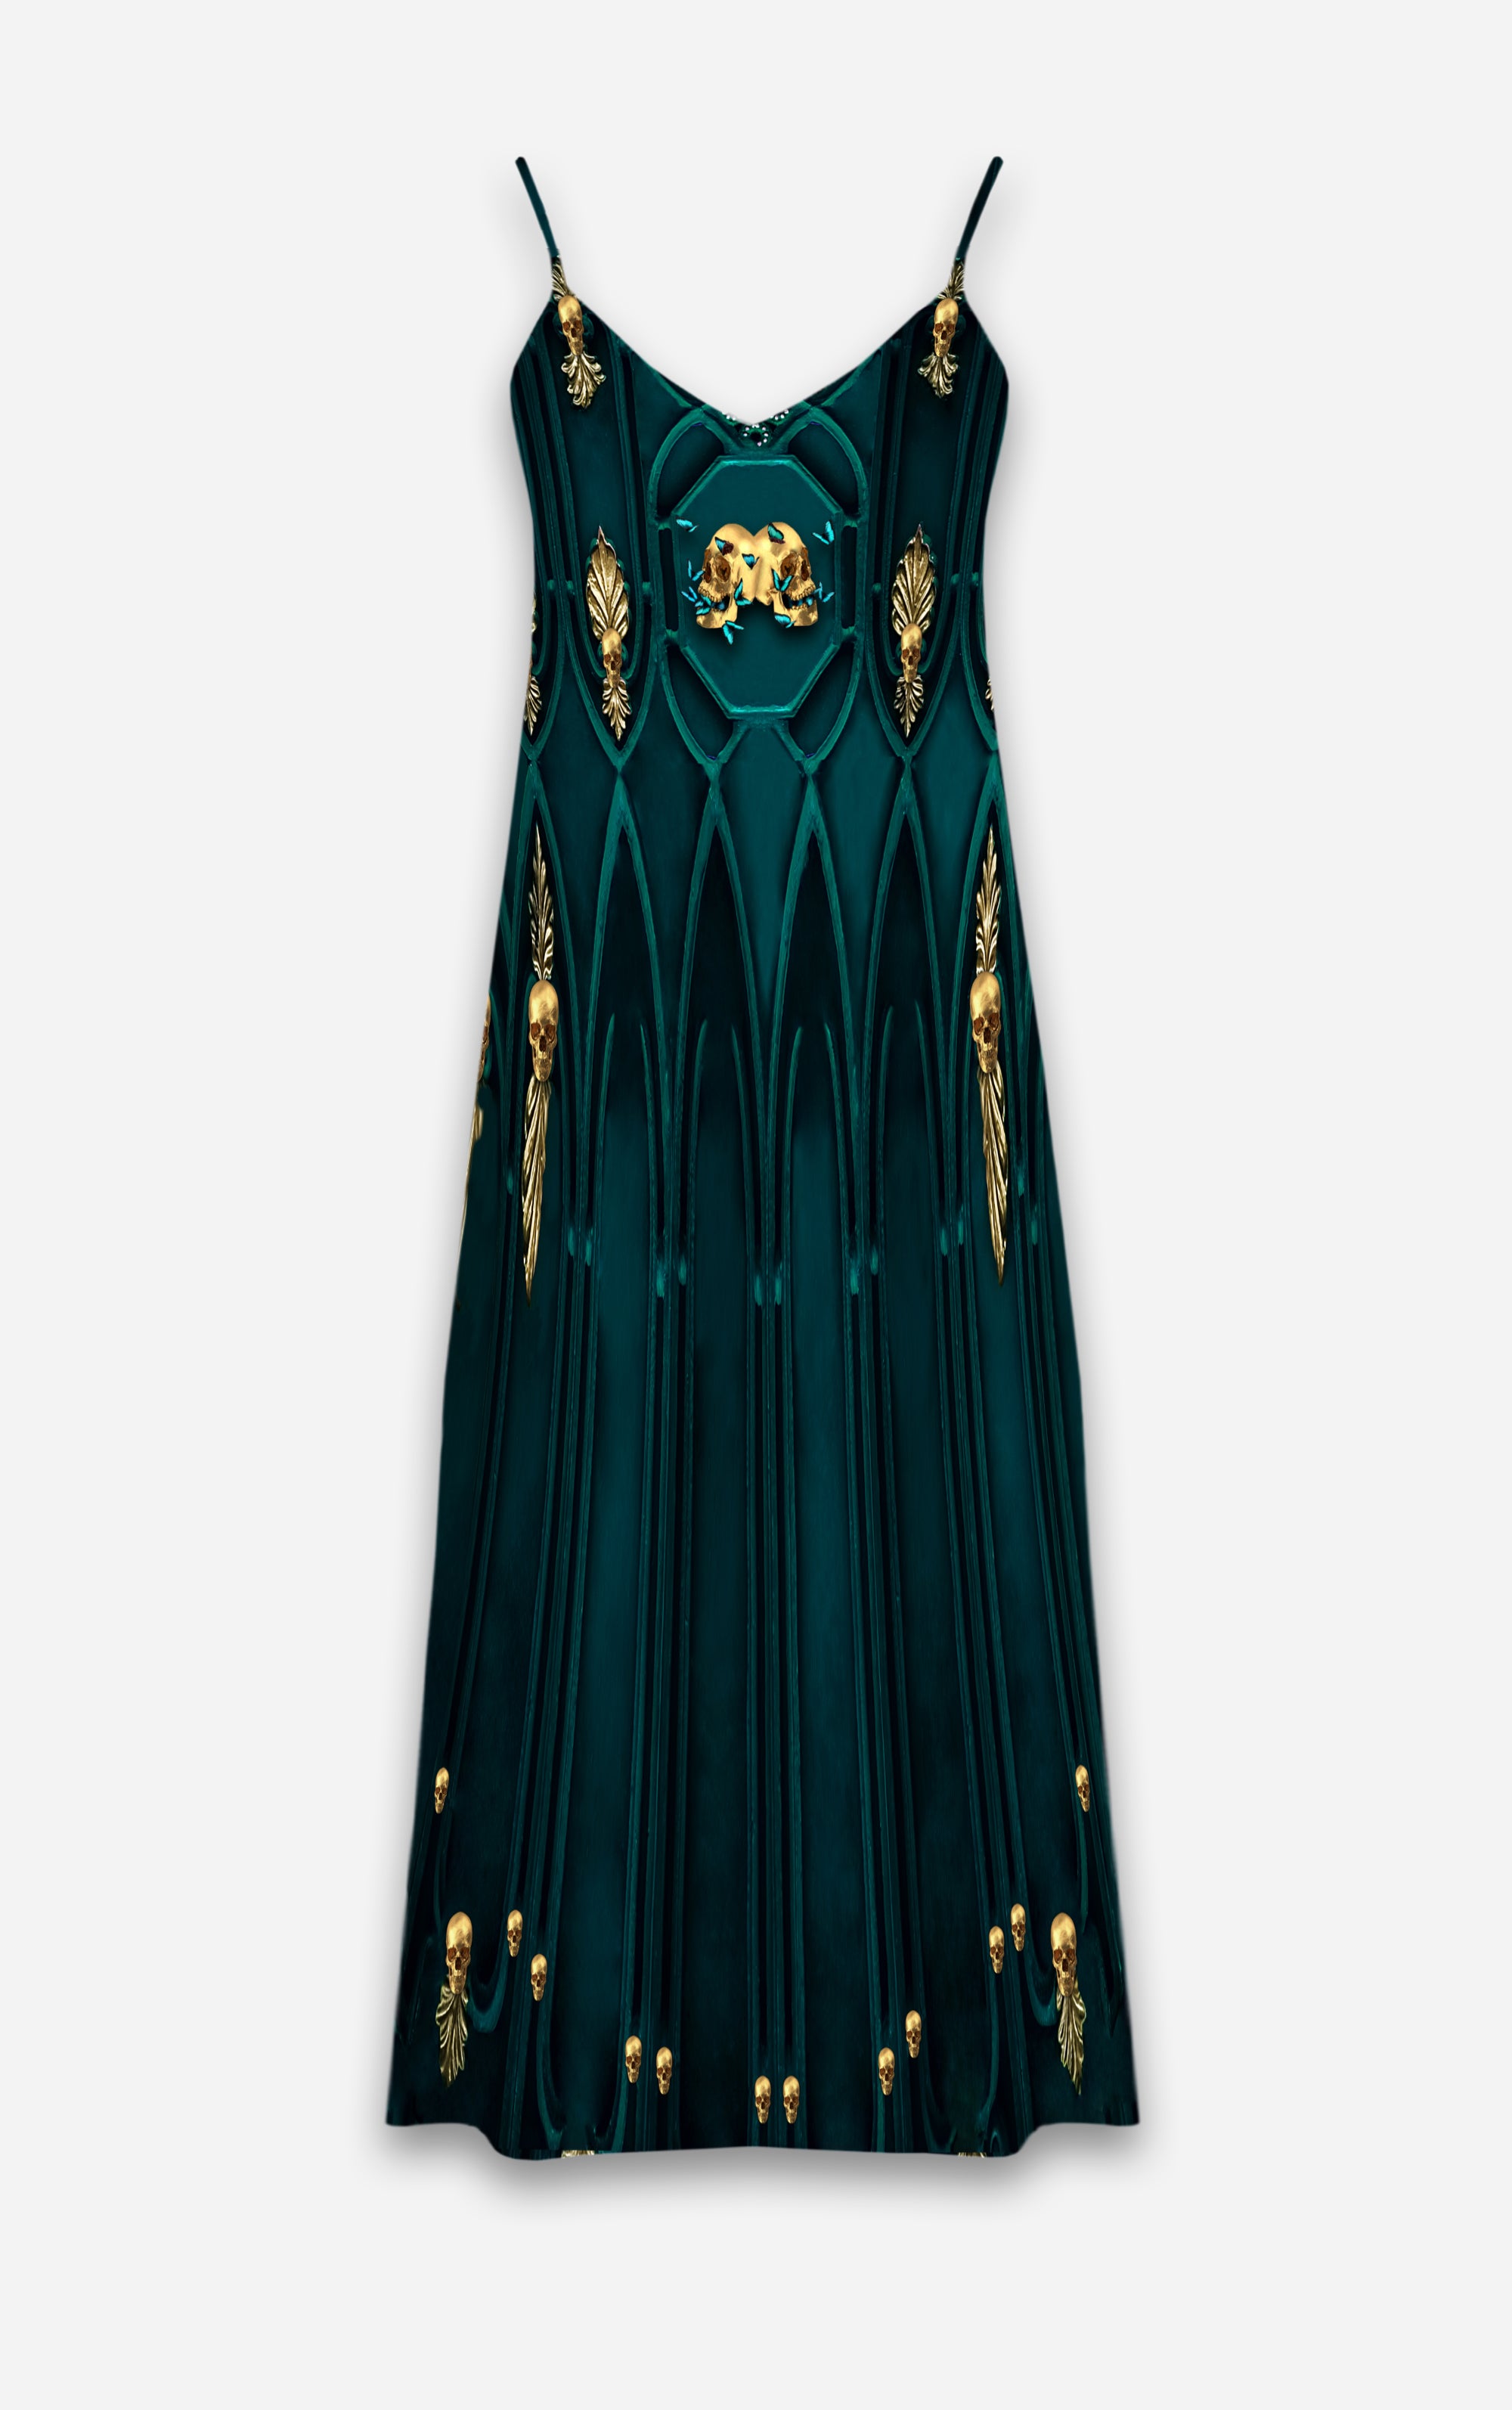 All Saints Cathedral- French Gothic V Neck Slip Dress in Midnight Teal | Le Leanian™